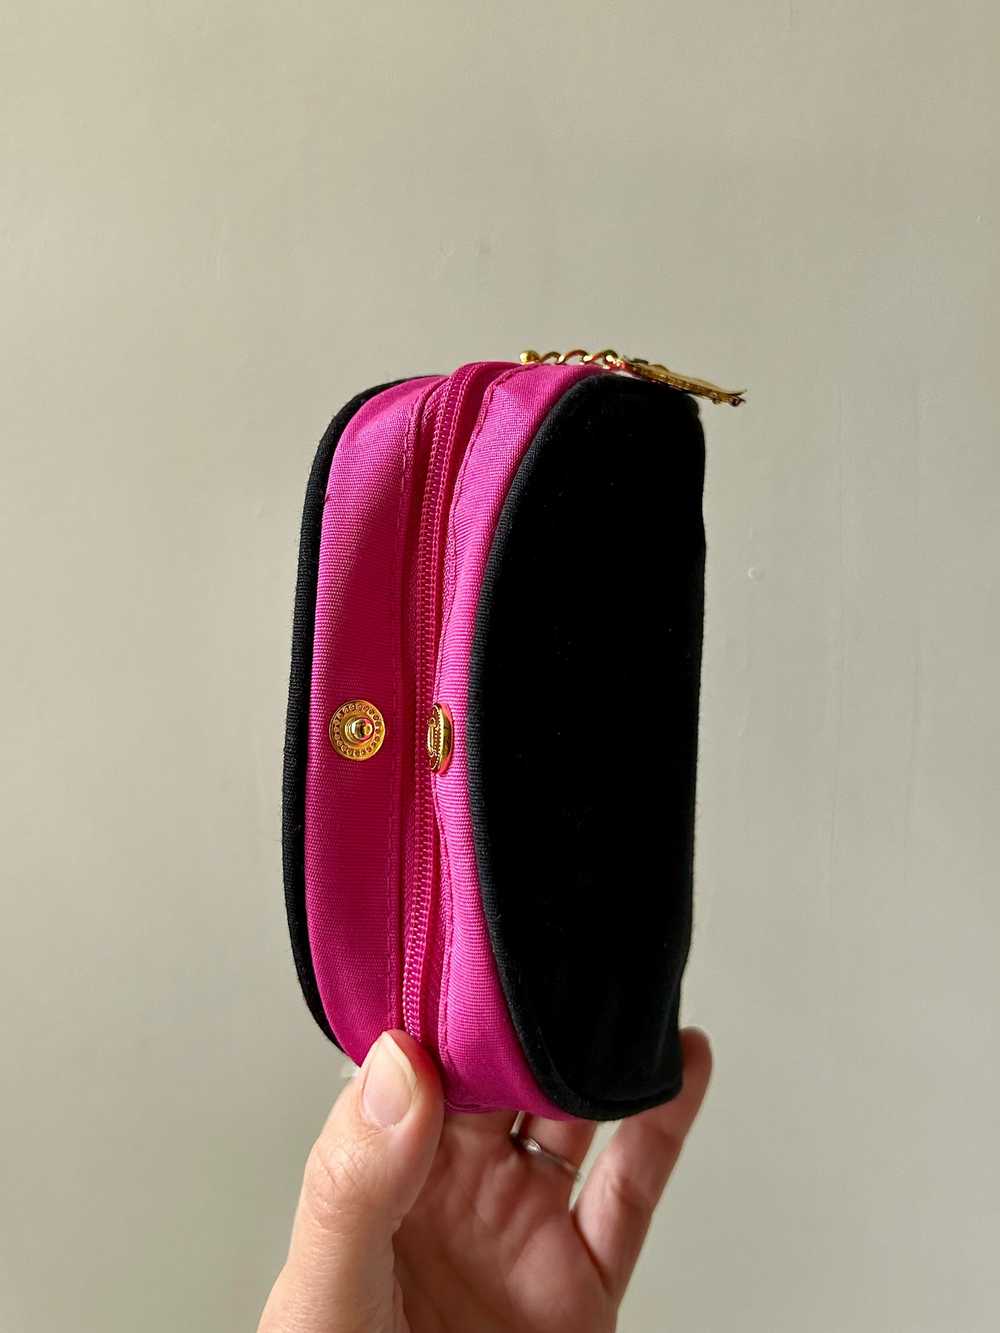 Vintage YSL Black and Hot Pink Makeup Pouch - image 6